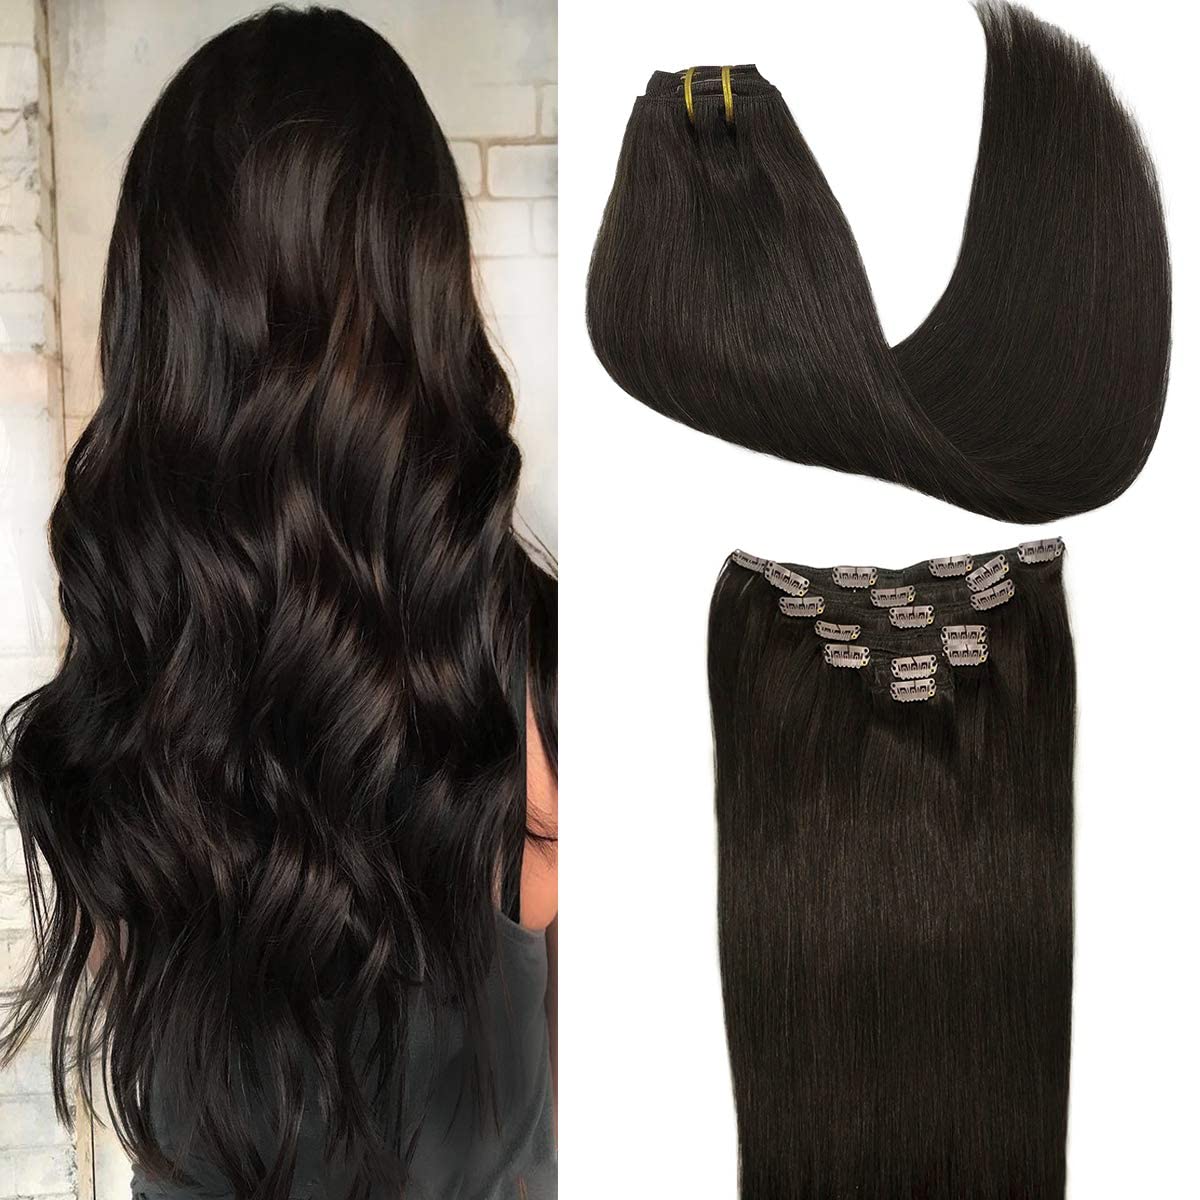 types-of-hair-extension-products-how-are-current-hair-extensions-products-changing-and-improving-2